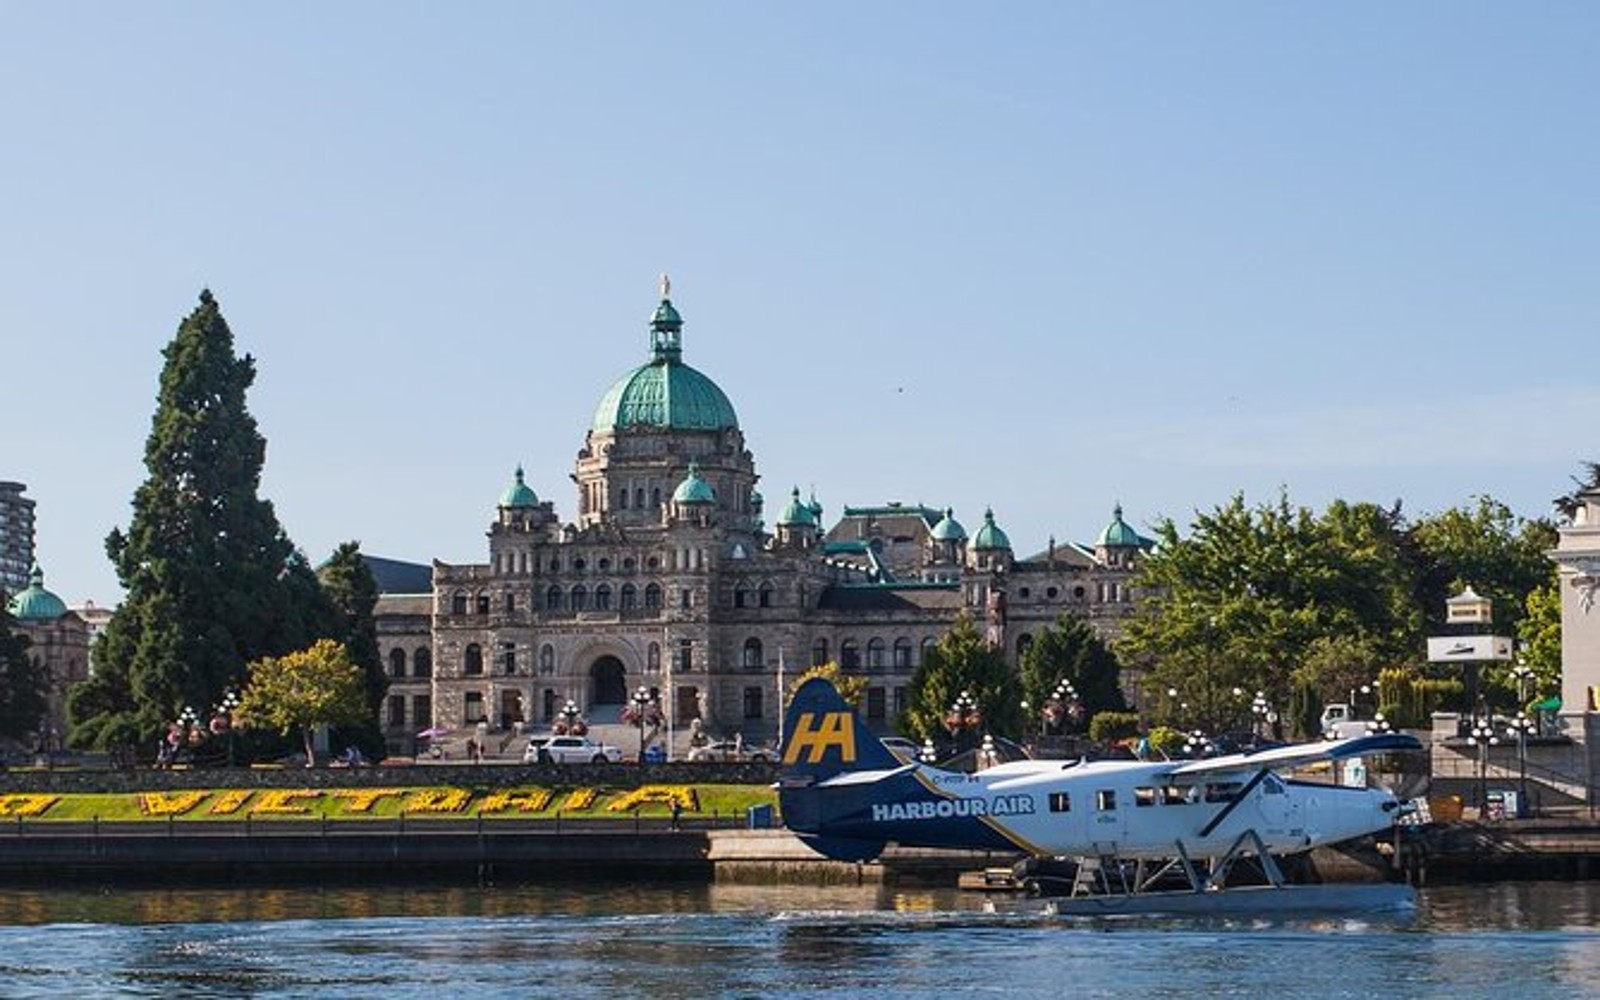 A Vancouver to Victoria seaplane docks in front of the BC Parliament Buildings, Victoria, BC